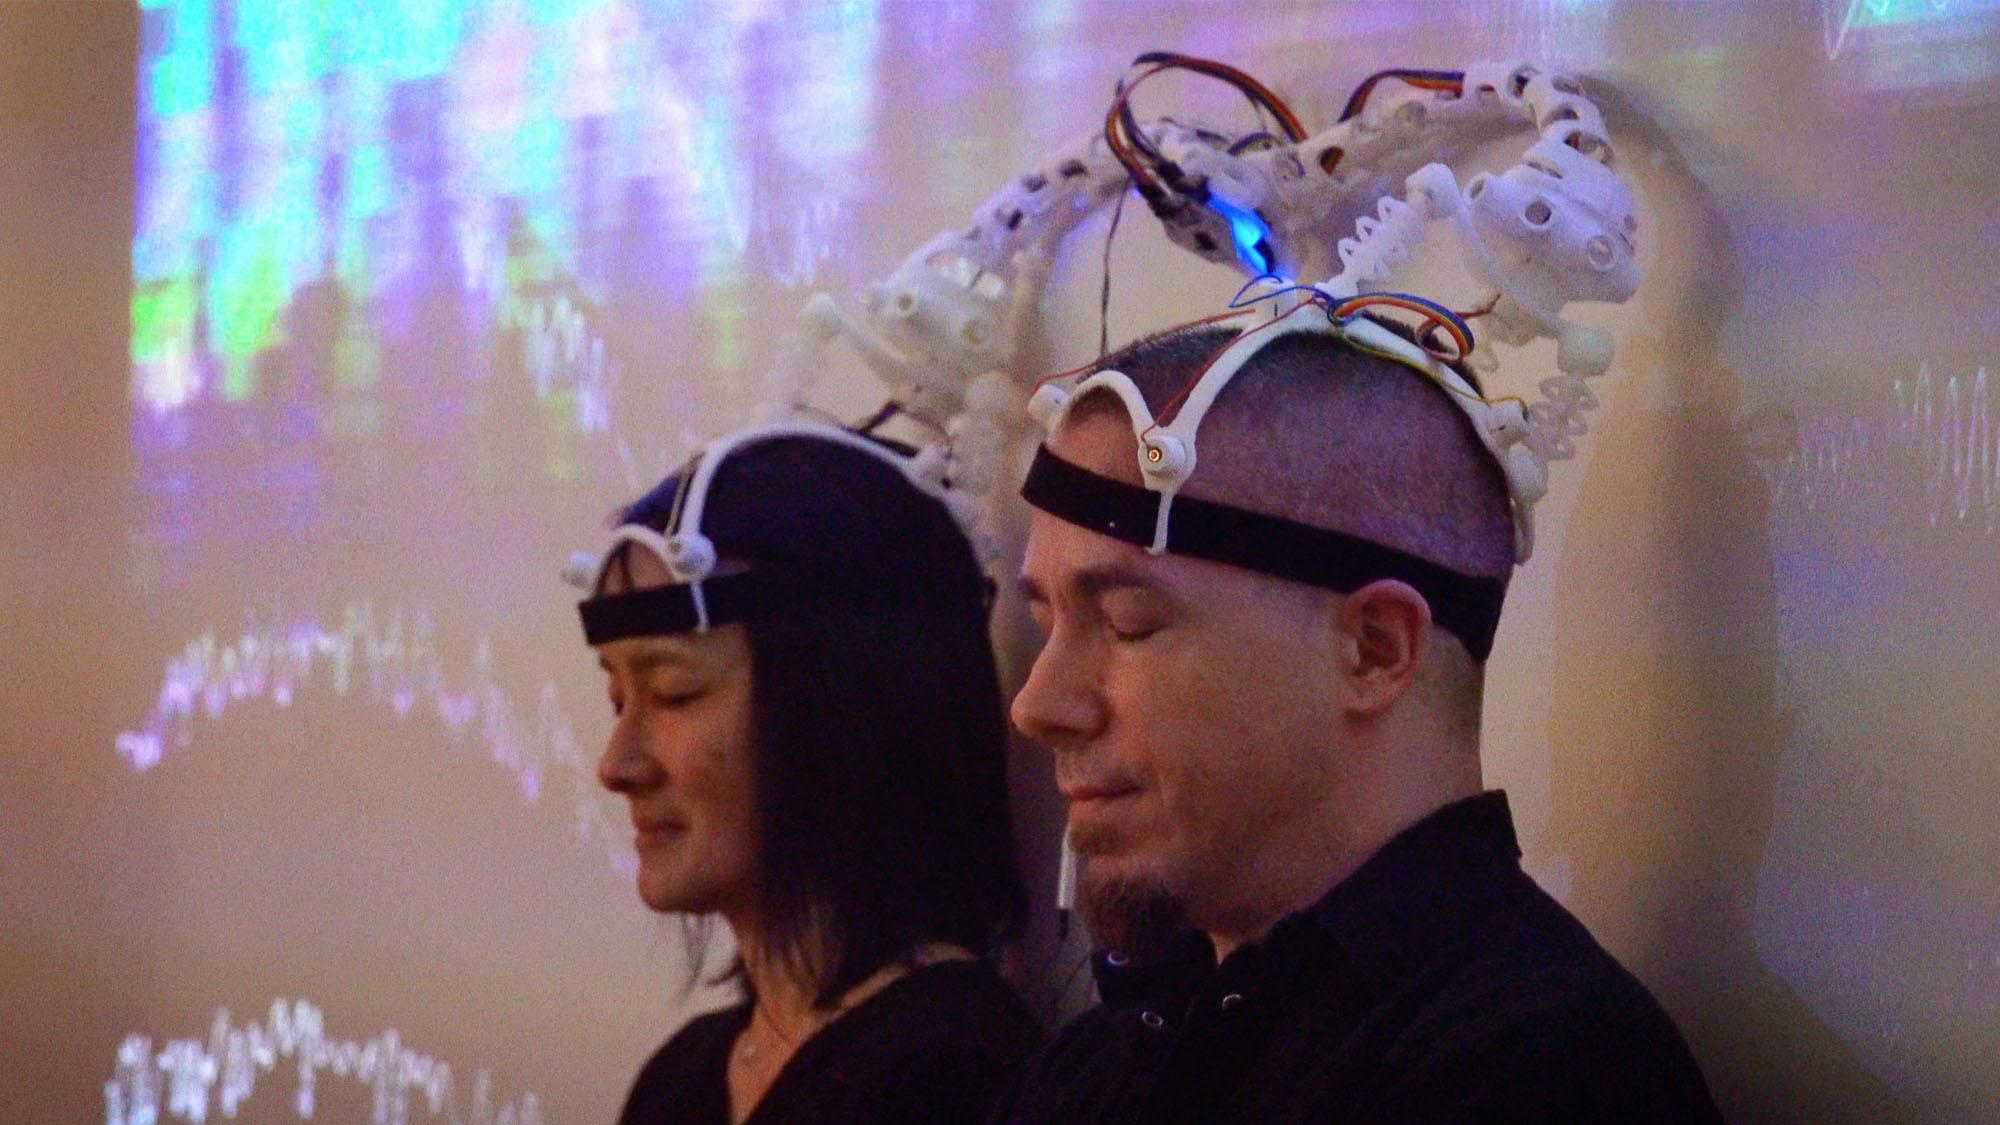 A woman and man share a custom 3D printed headset made for two